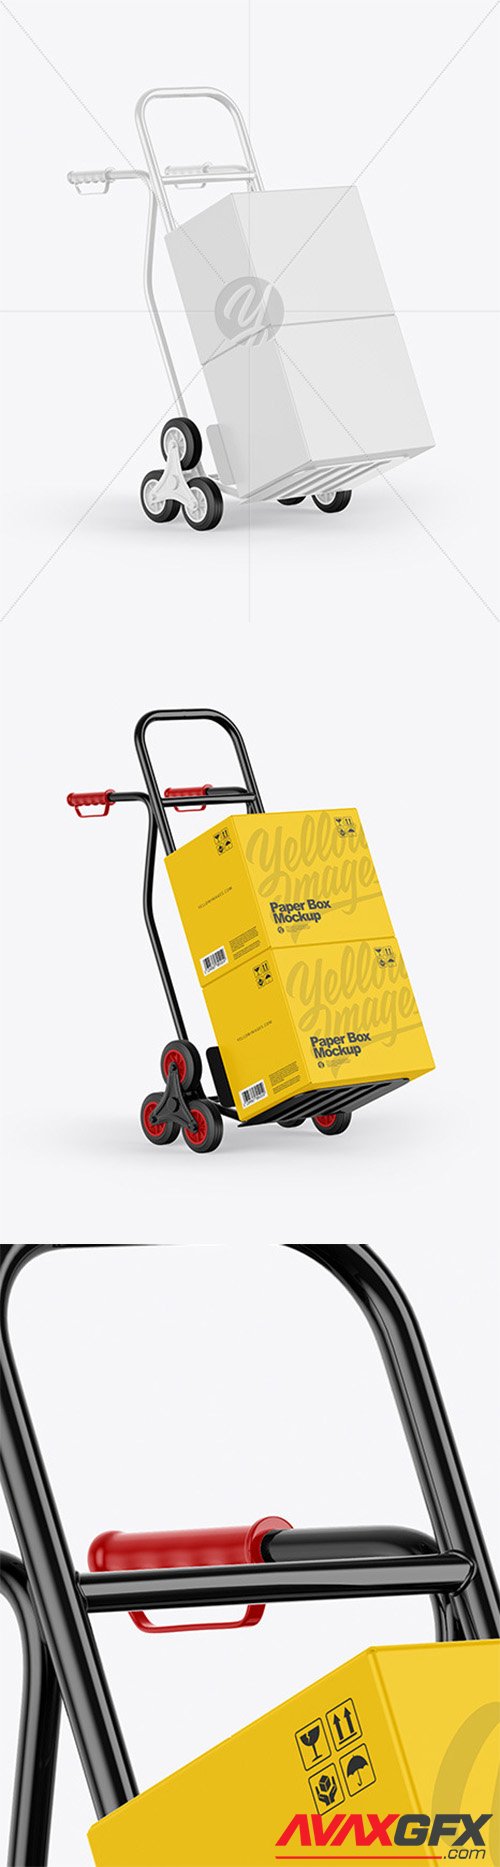 Hand Truck With Boxes Mockup 58380